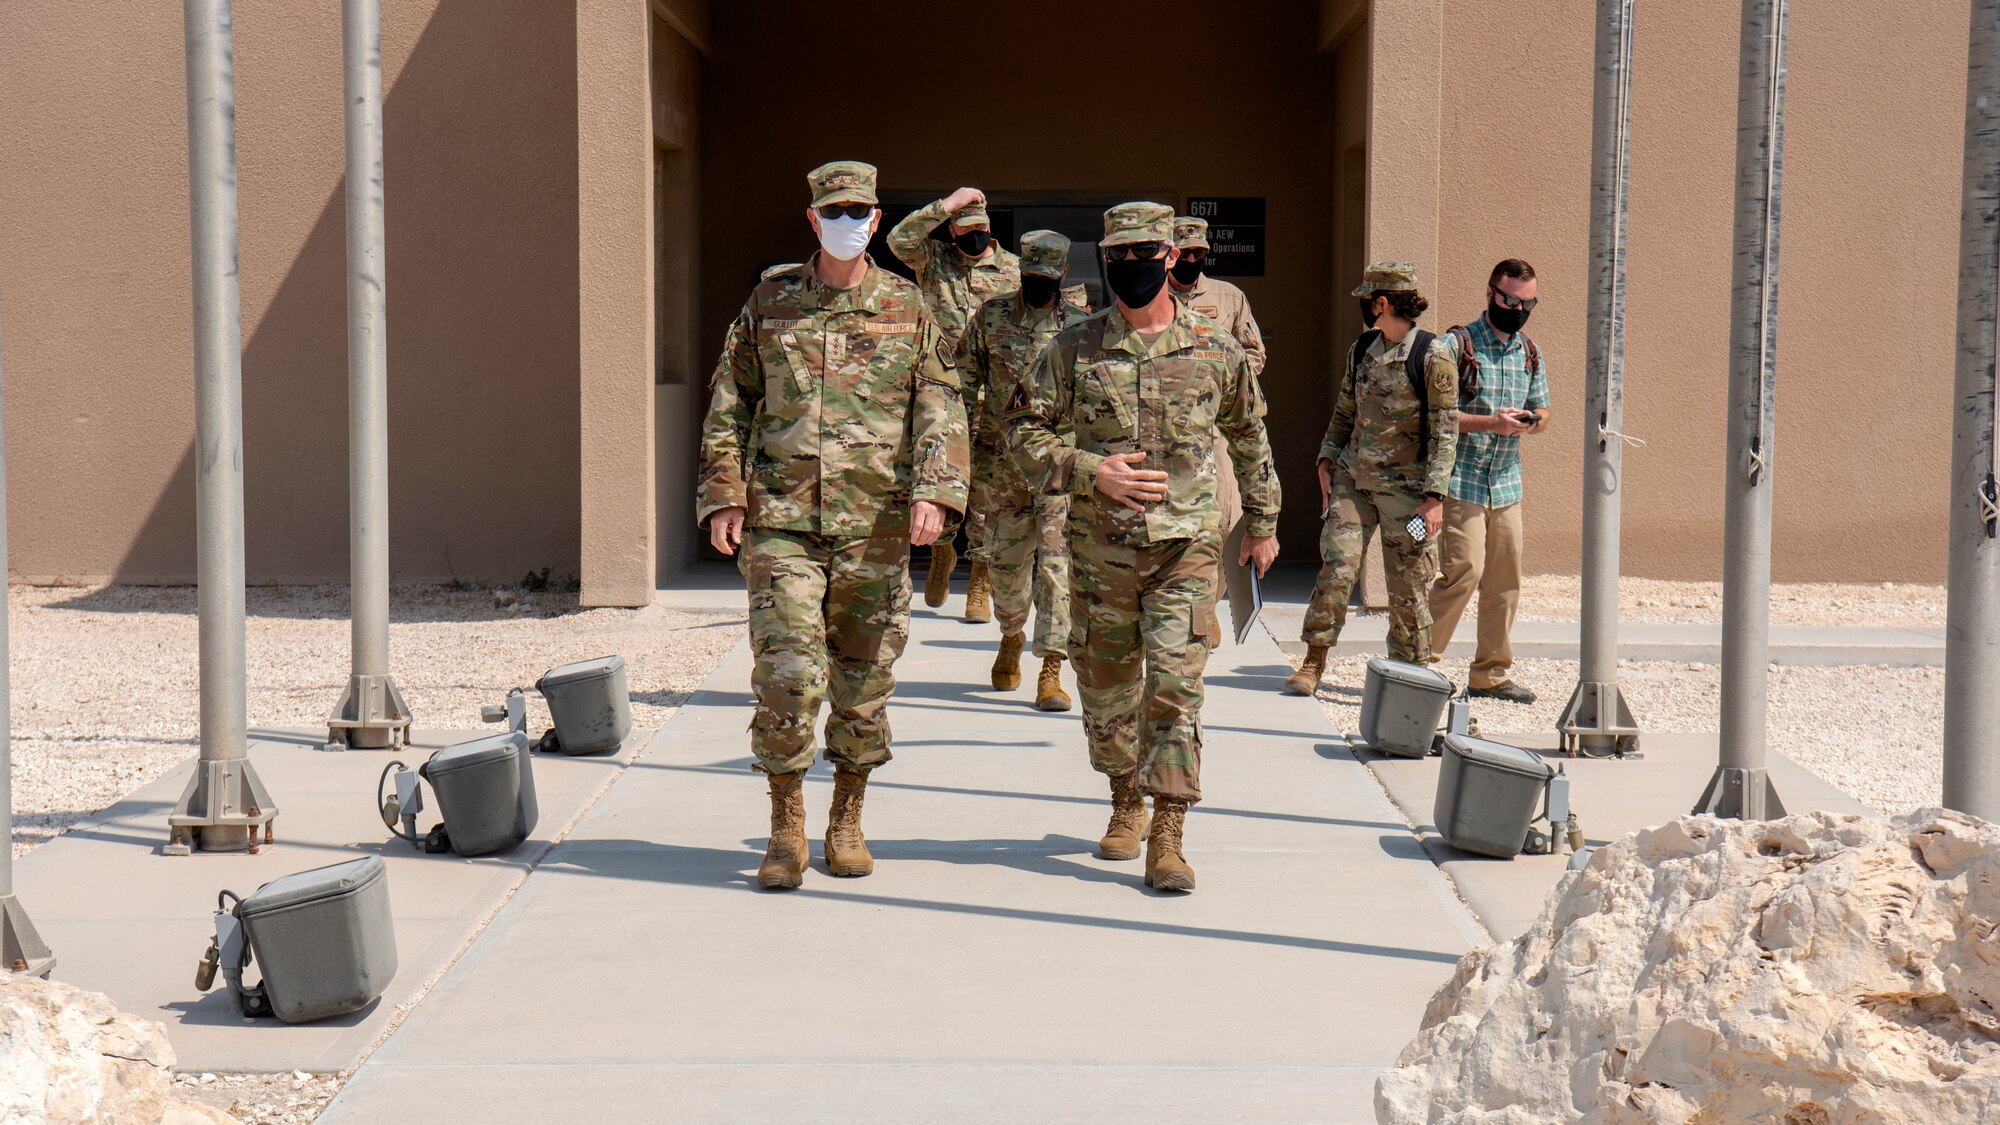 U.S. Air Force Lt. Gen. Greg Guillot, U.S. Air Forces Central commander, walks with Brig. Gen. Daniel Tulley, 379th Air Expeditionary Wing commander, during his troop engagement with the 379th AEW at Al Udeid Air Base, Qatar, Sept. 28, 2020. During his visit, Guillot briefed his expectations for the 379th AEW, as well as the expectations his Airmen should have of him.